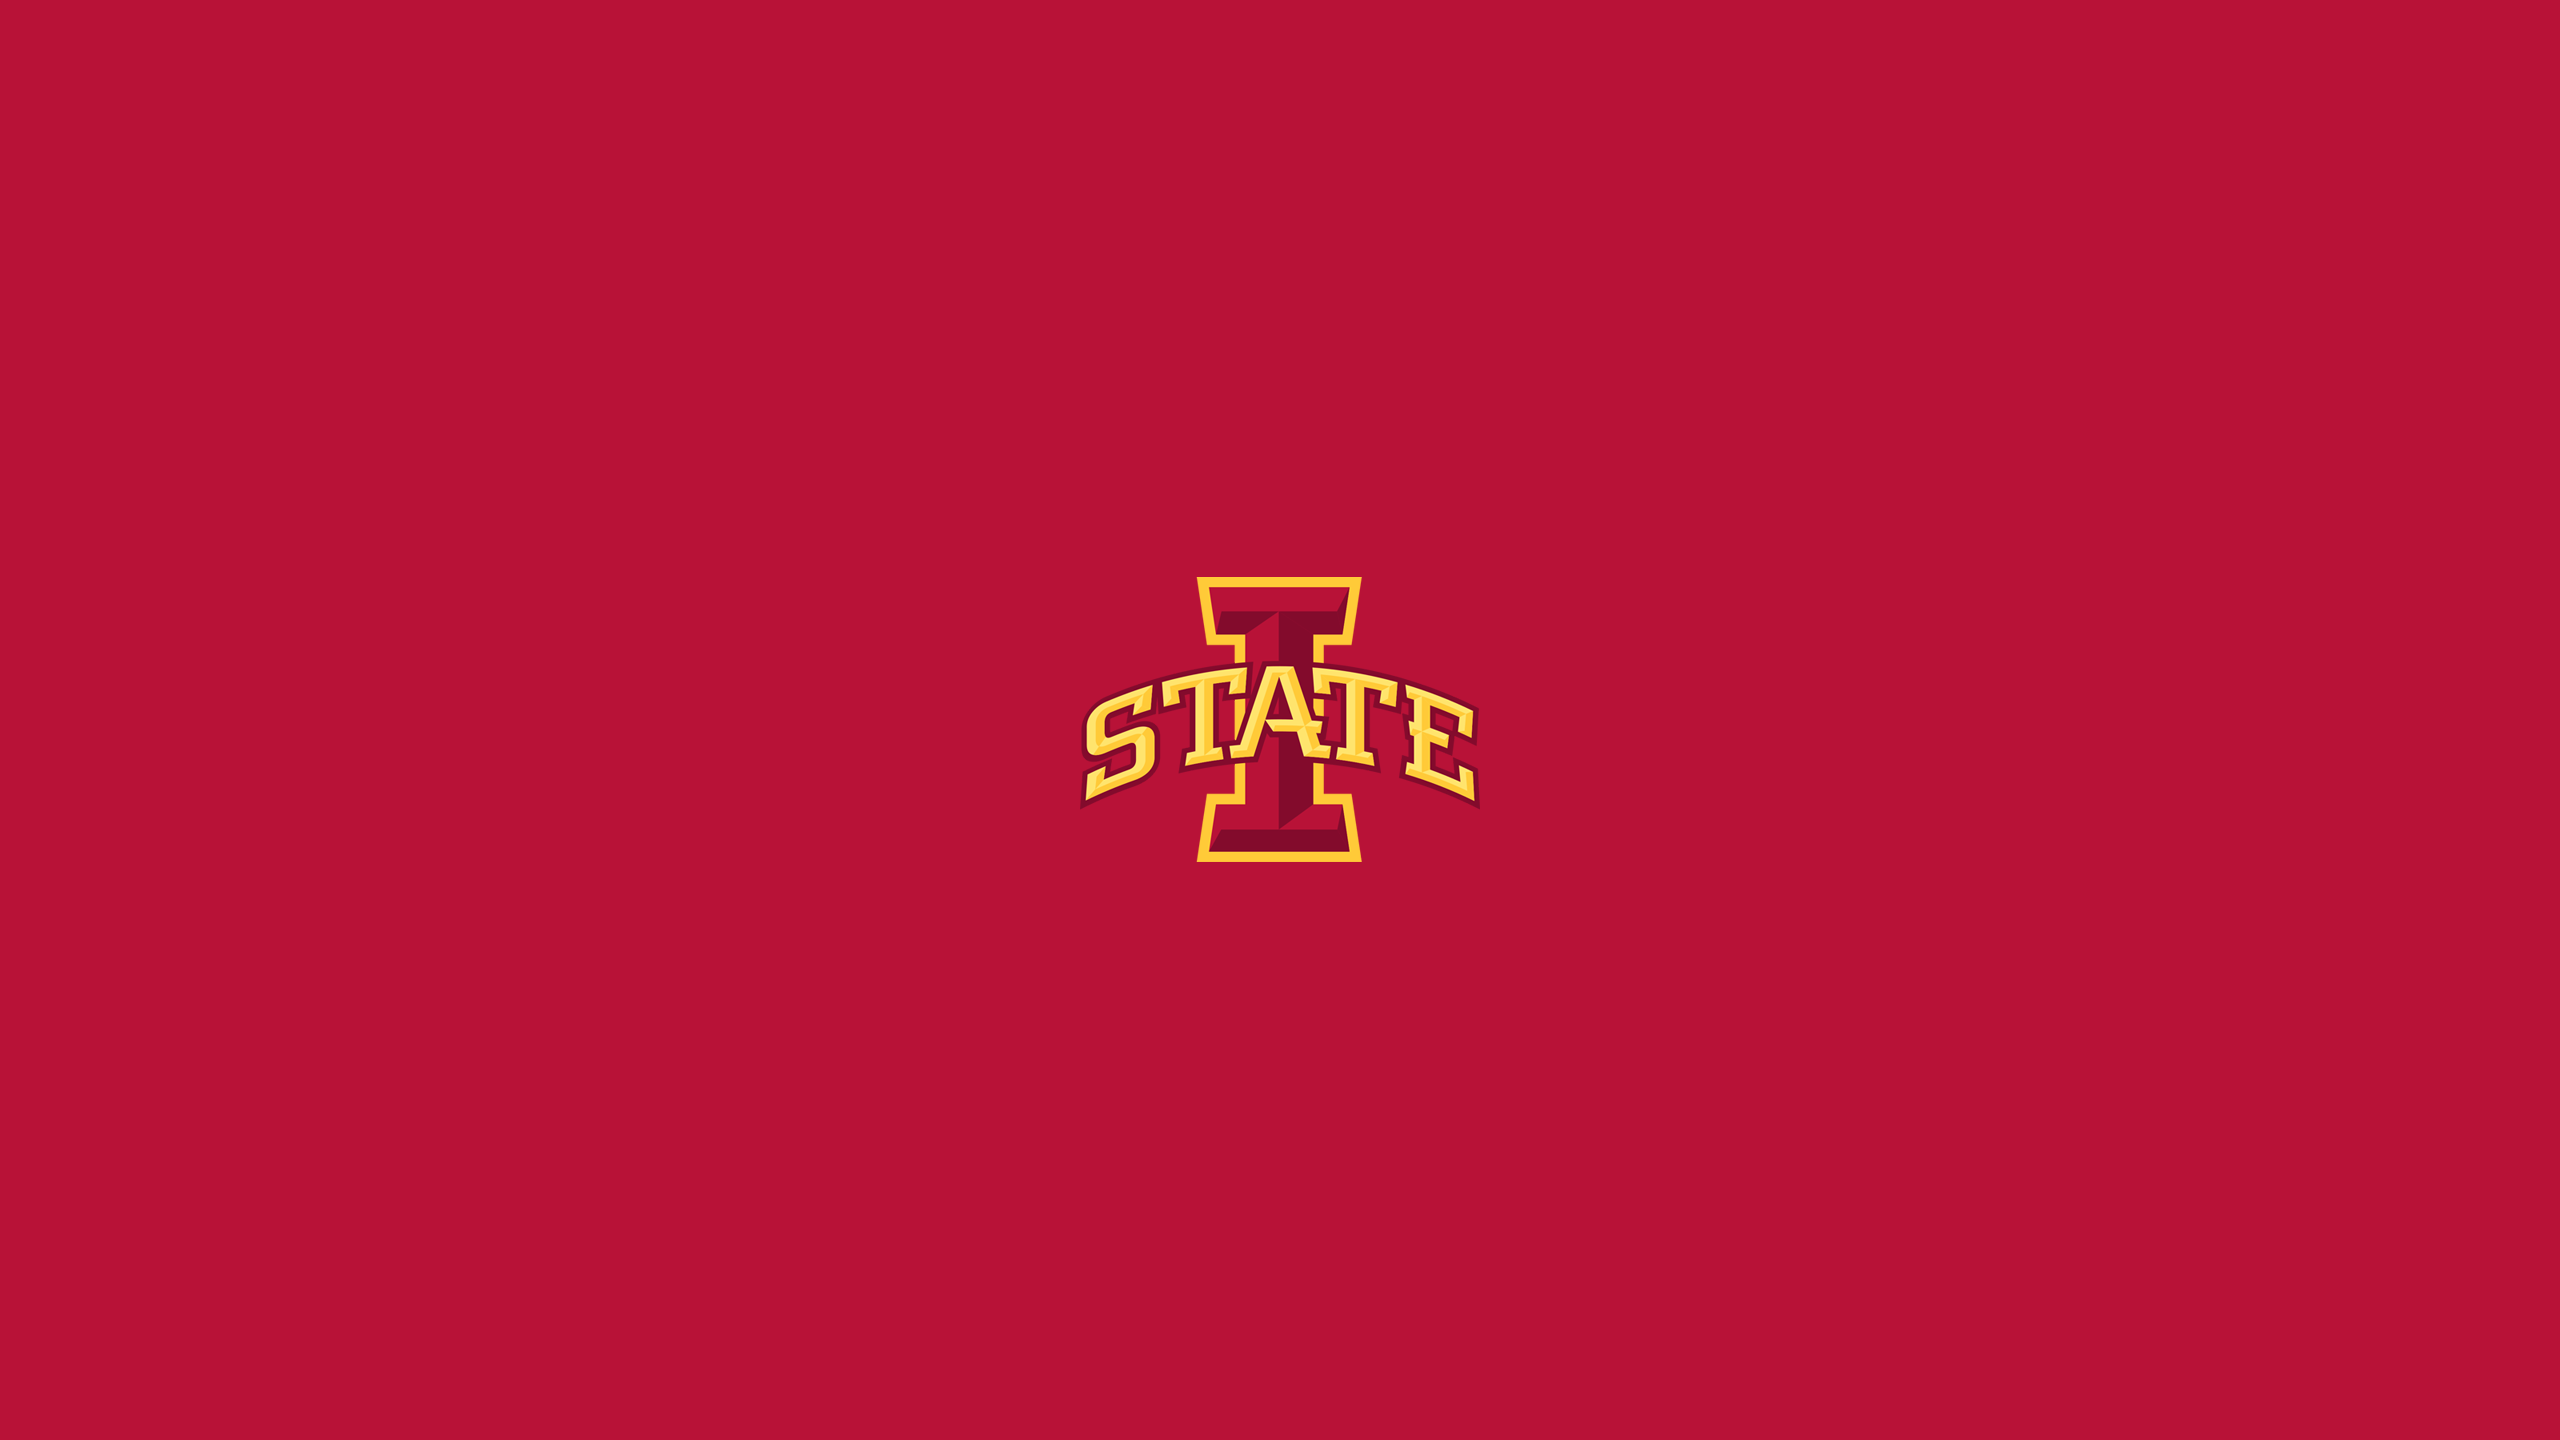 Iowa State Cyclones Football - NCAAF - Square Bettor